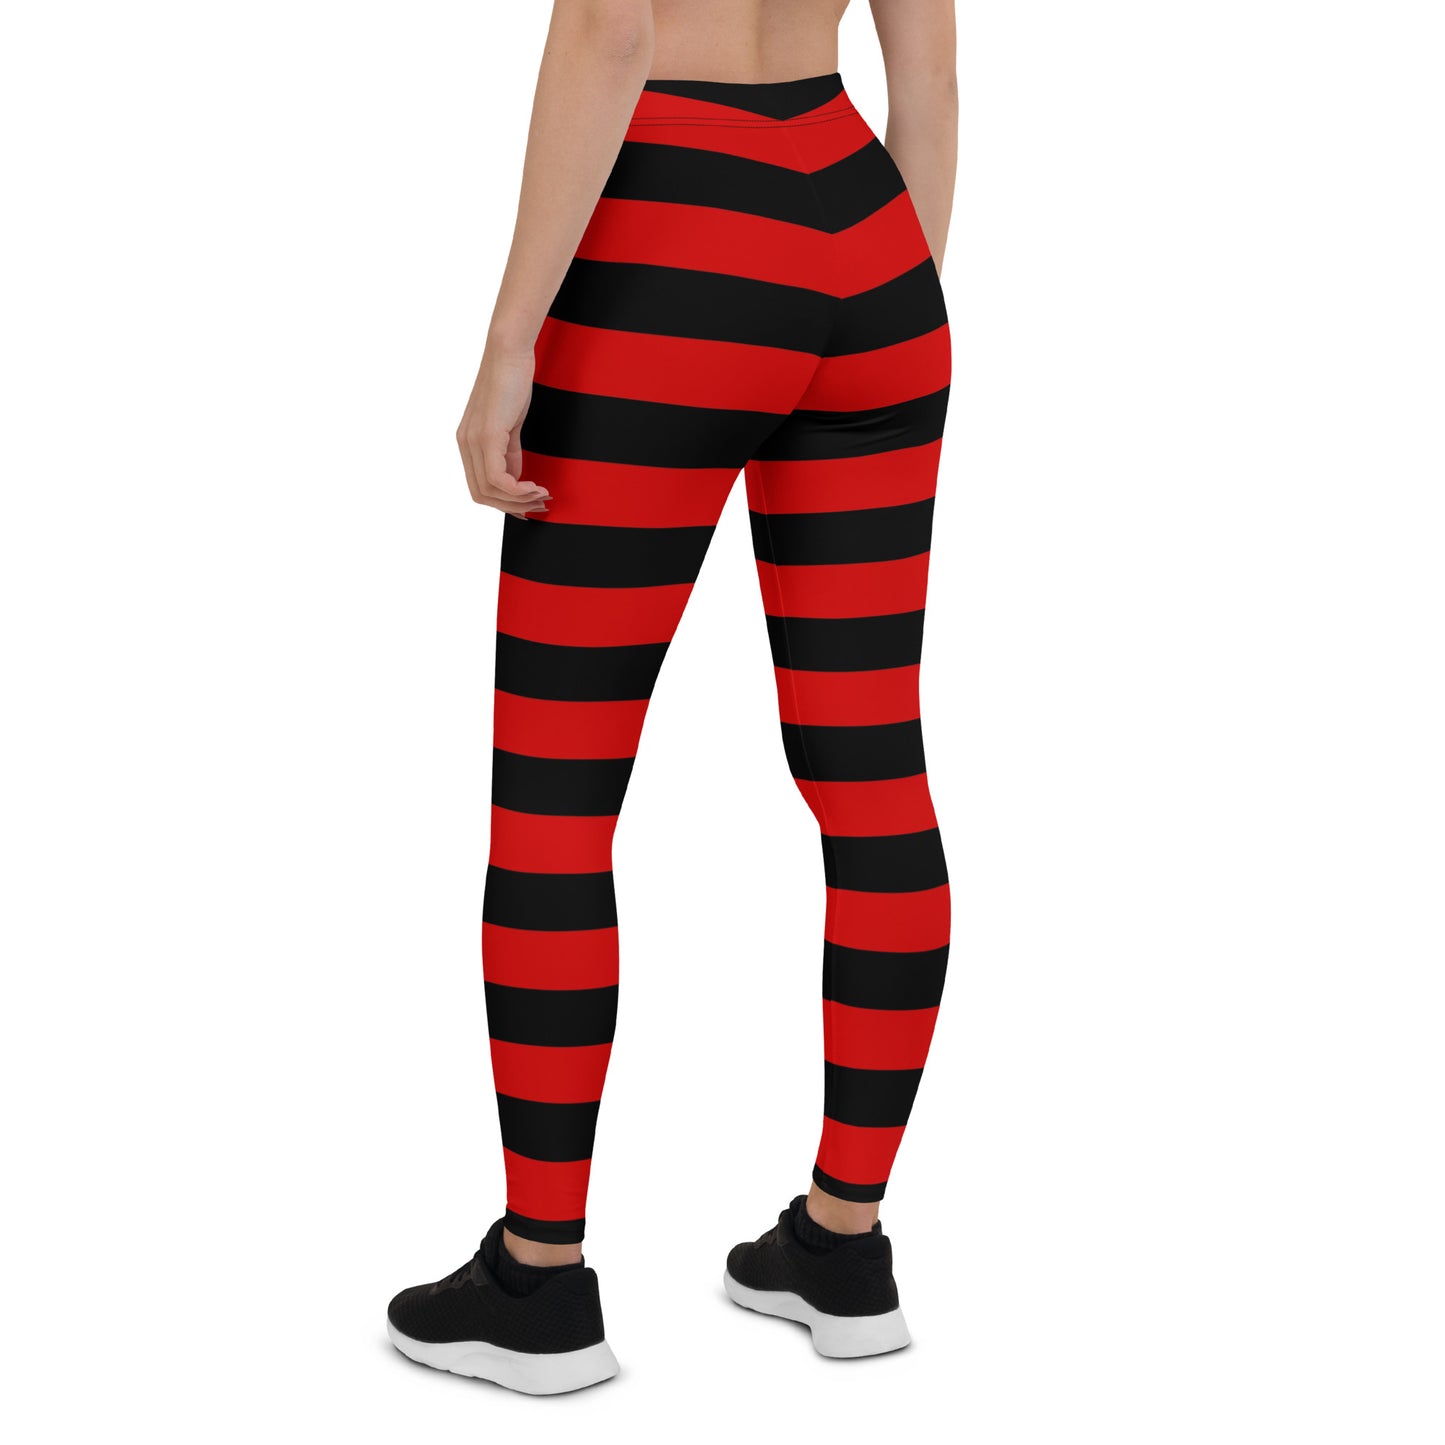 Red and Black Striped Leggings Women, Halloween Witch Goth Printed Yoga Pants Cute Graphic Workout Designer Tights Starcove Fashion